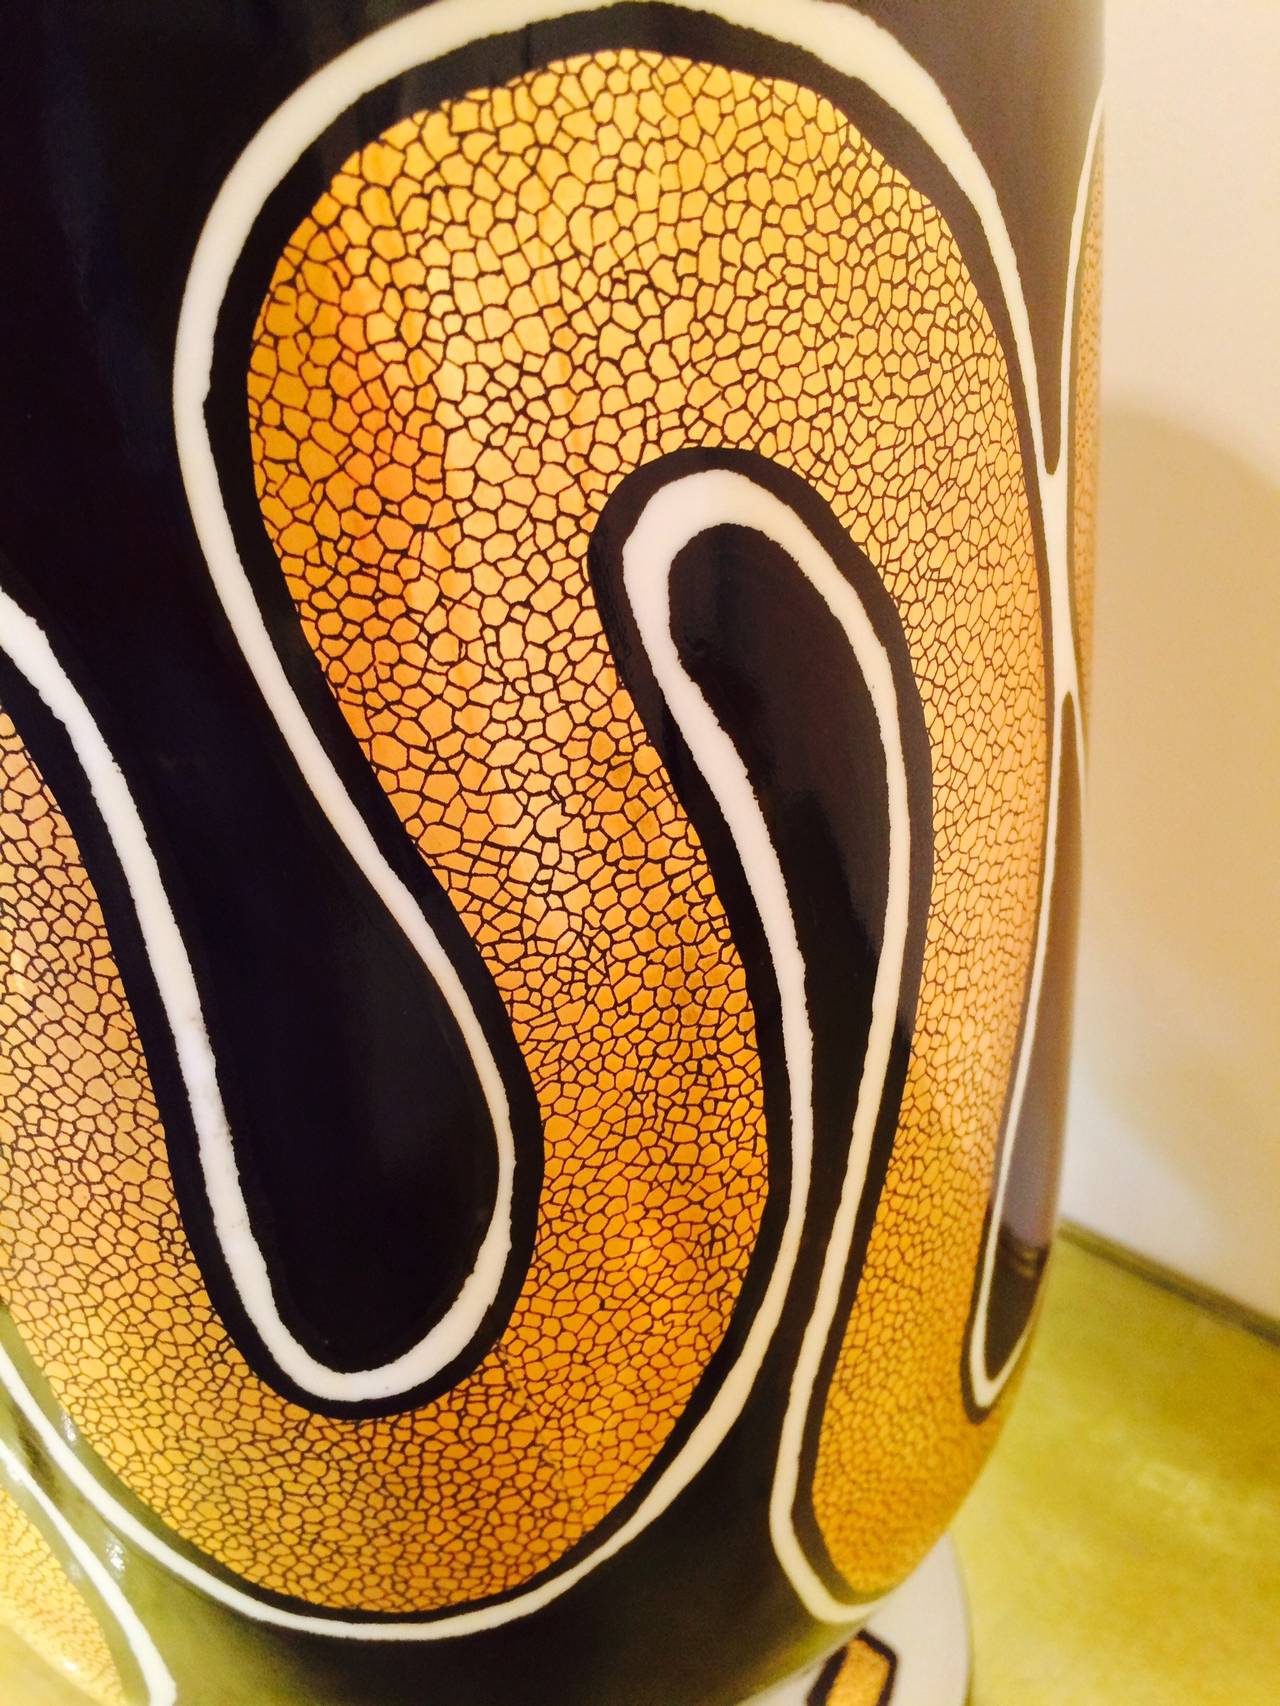 Pair of vases in the style of the 1940s in porcelain.
A gold snake on black background.
Signed Blandin